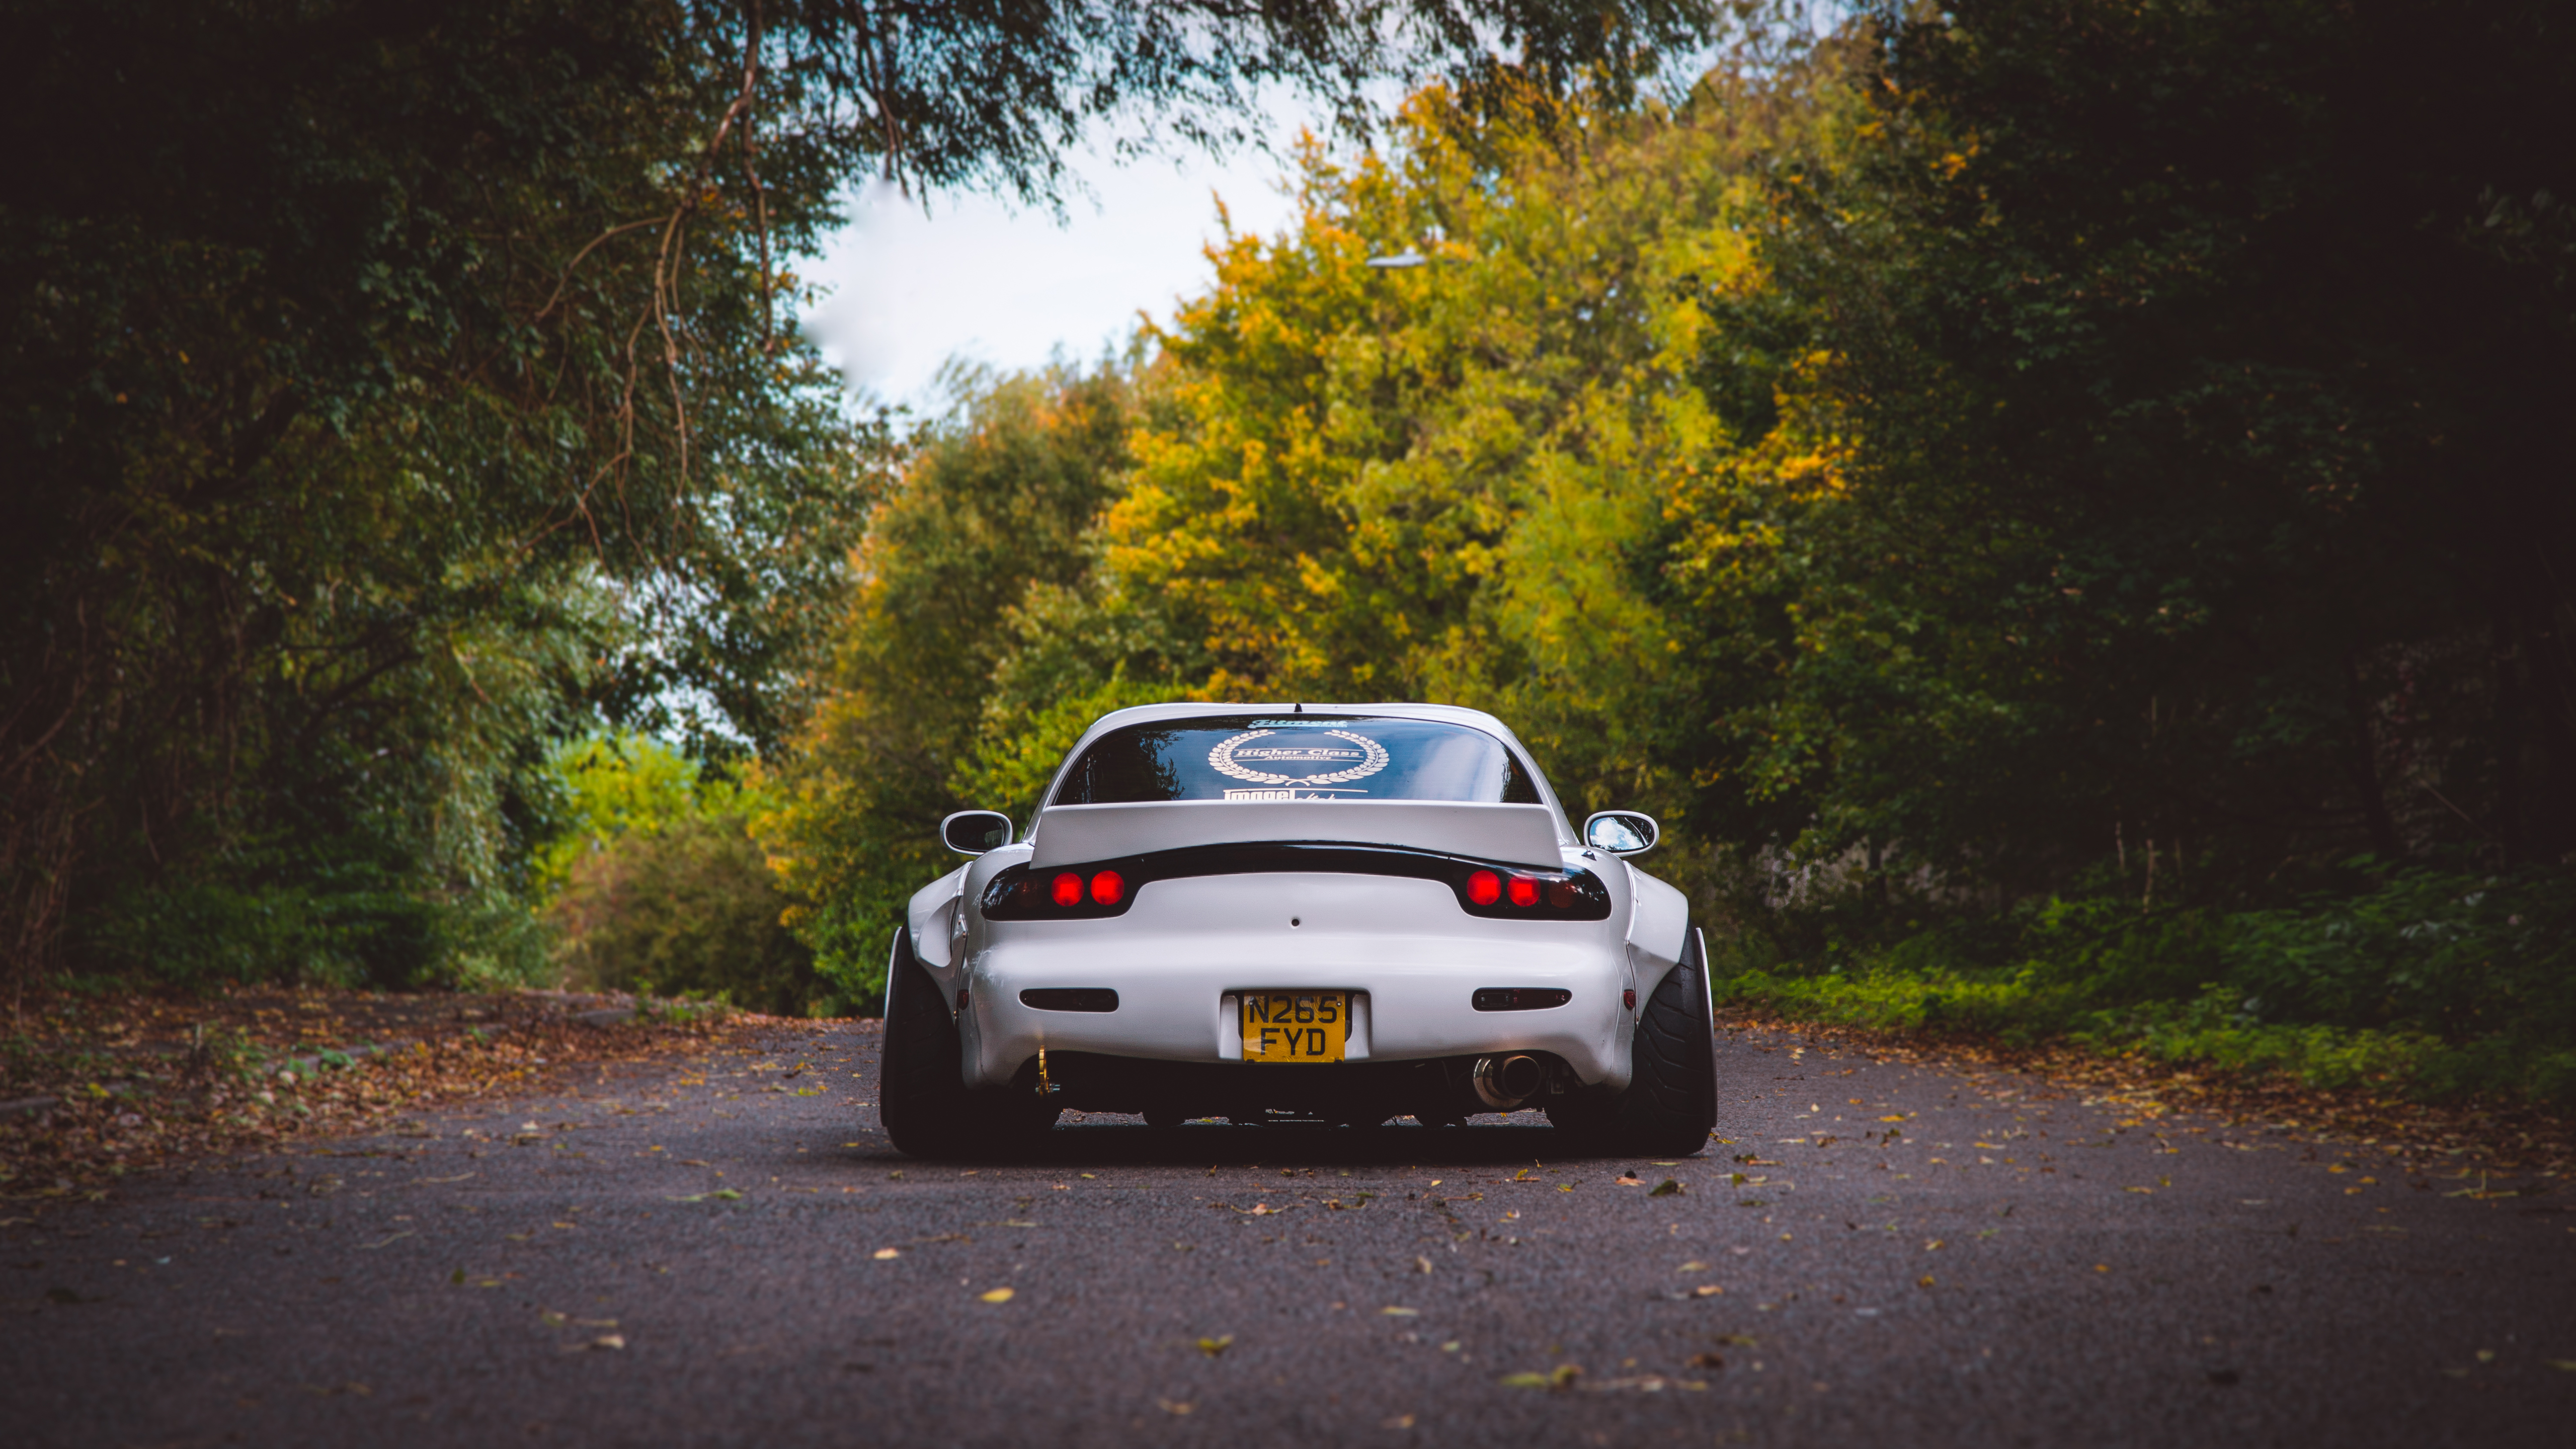 General 5120x2880 car vehicle tuning road trees white cars widebody Japanese cars Mazda RX-7 rear view bolt-on fender flares Mazda